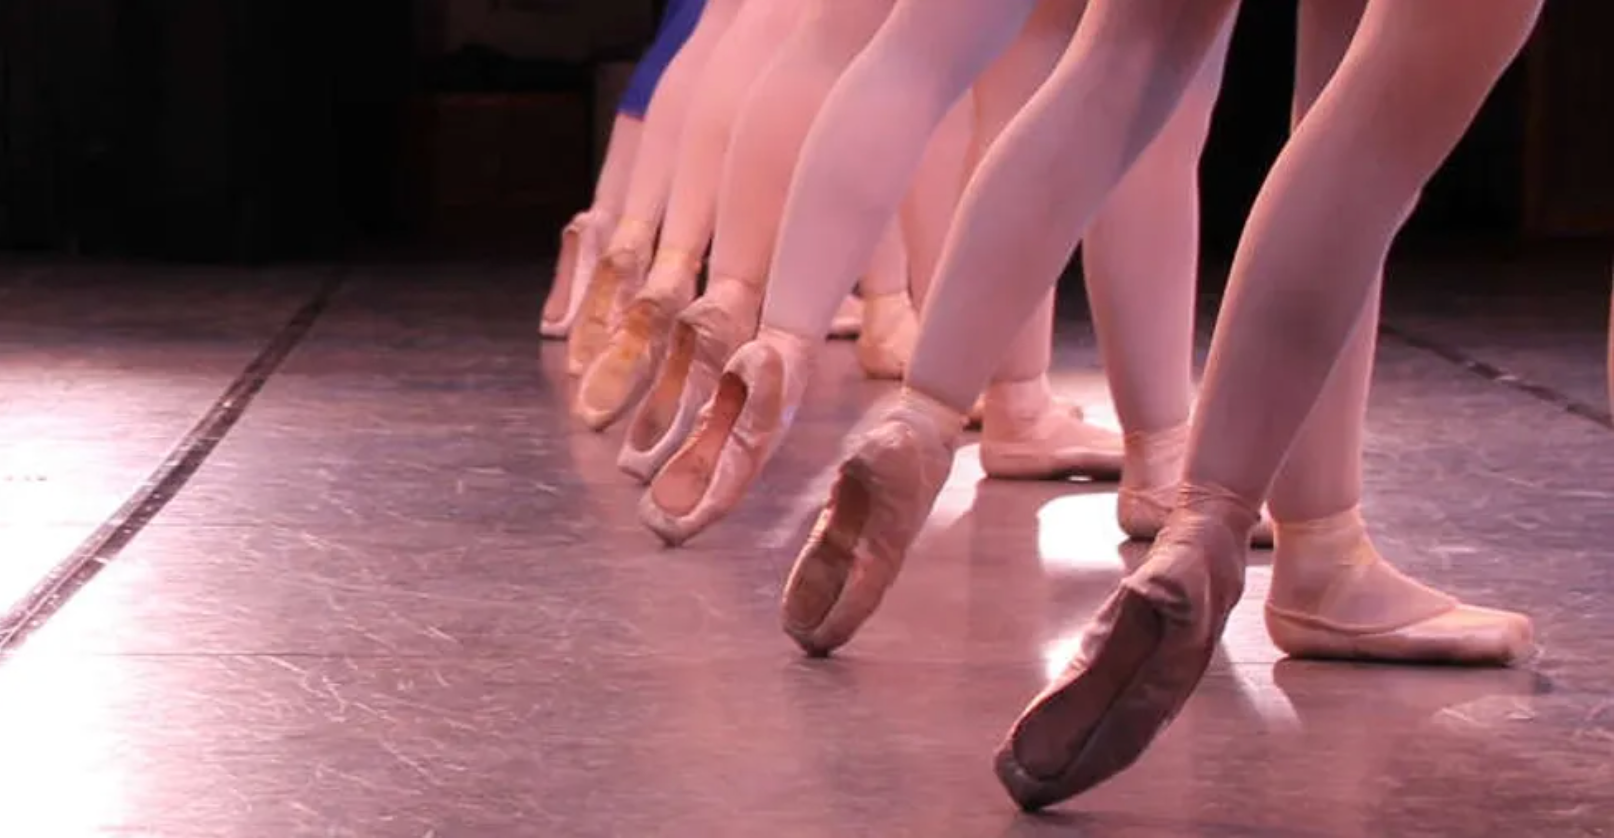 A ballet company's response to one football fan's sexist insult on Facebook  was epic - Upworthy